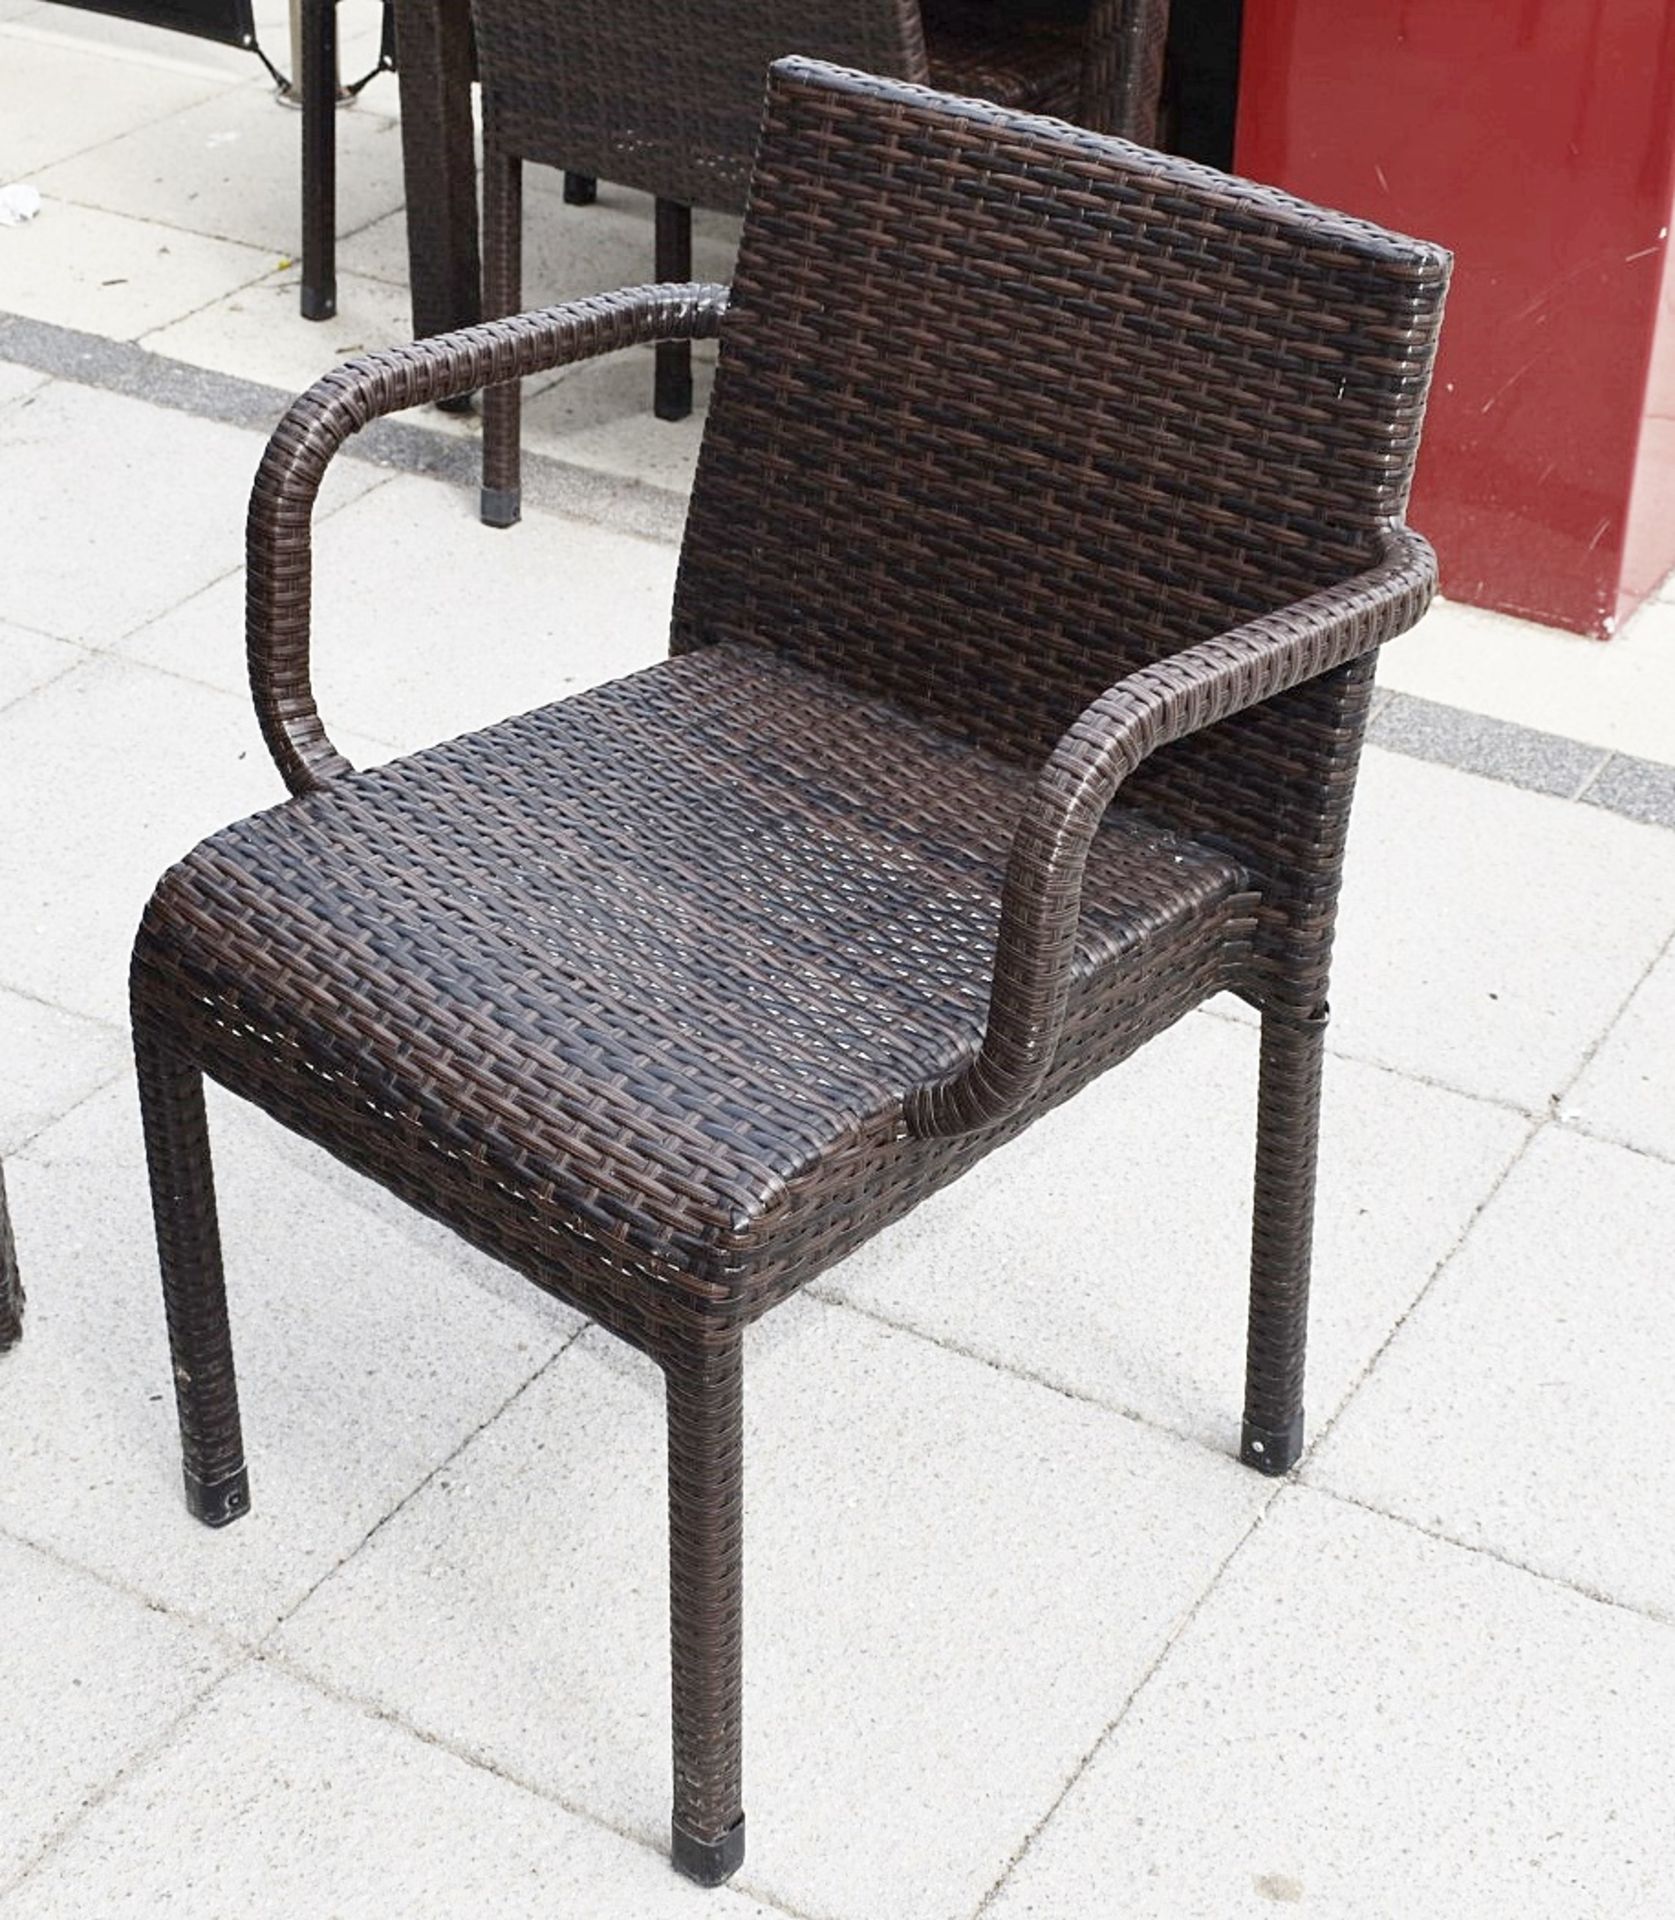 4 x Outdoor Rattan Garden Chairs With A Matching Square Table - Image 3 of 5